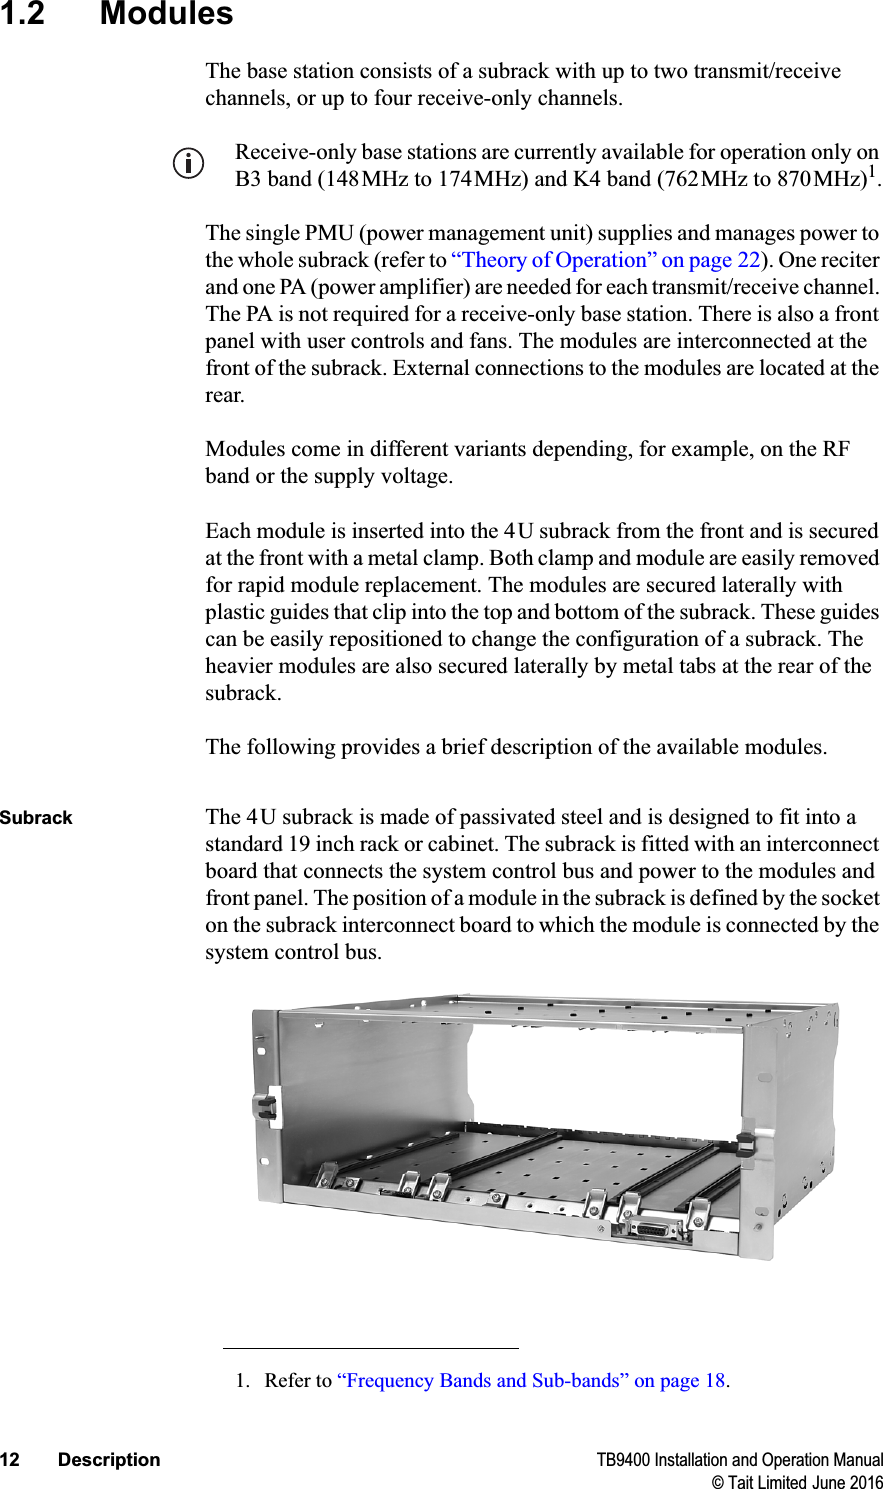 12 Description TB9400 Installation and Operation Manual© Tait Limited June 20161.2 ModulesThe base station consists of a subrack with up to two transmit/receive channels, or up to four receive-only channels. Receive-only base stations are currently available for operation only on B3 band (148MHz to 174MHz) and K4 band (762MHz to 870MHz)1.The single PMU (power management unit) supplies and manages power to the whole subrack (refer to “Theory of Operation” on page 22). One reciter and one PA (power amplifier) are needed for each transmit/receive channel. The PA is not required for a receive-only base station. There is also a front panel with user controls and fans. The modules are interconnected at the front of the subrack. External connections to the modules are located at the rear.Modules come in different variants depending, for example, on the RF band or the supply voltage. Each module is inserted into the 4U subrack from the front and is secured at the front with a metal clamp. Both clamp and module are easily removed for rapid module replacement. The modules are secured laterally with plastic guides that clip into the top and bottom of the subrack. These guides can be easily repositioned to change the configuration of a subrack. The heavier modules are also secured laterally by metal tabs at the rear of the subrack.The following provides a brief description of the available modules.Subrack The 4U subrack is made of passivated steel and is designed to fit into a standard 19 inch rack or cabinet. The subrack is fitted with an interconnect board that connects the system control bus and power to the modules and front panel. The position of a module in the subrack is defined by the socket on the subrack interconnect board to which the module is connected by the system control bus. 1. Refer to “Frequency Bands and Sub-bands” on page 18.